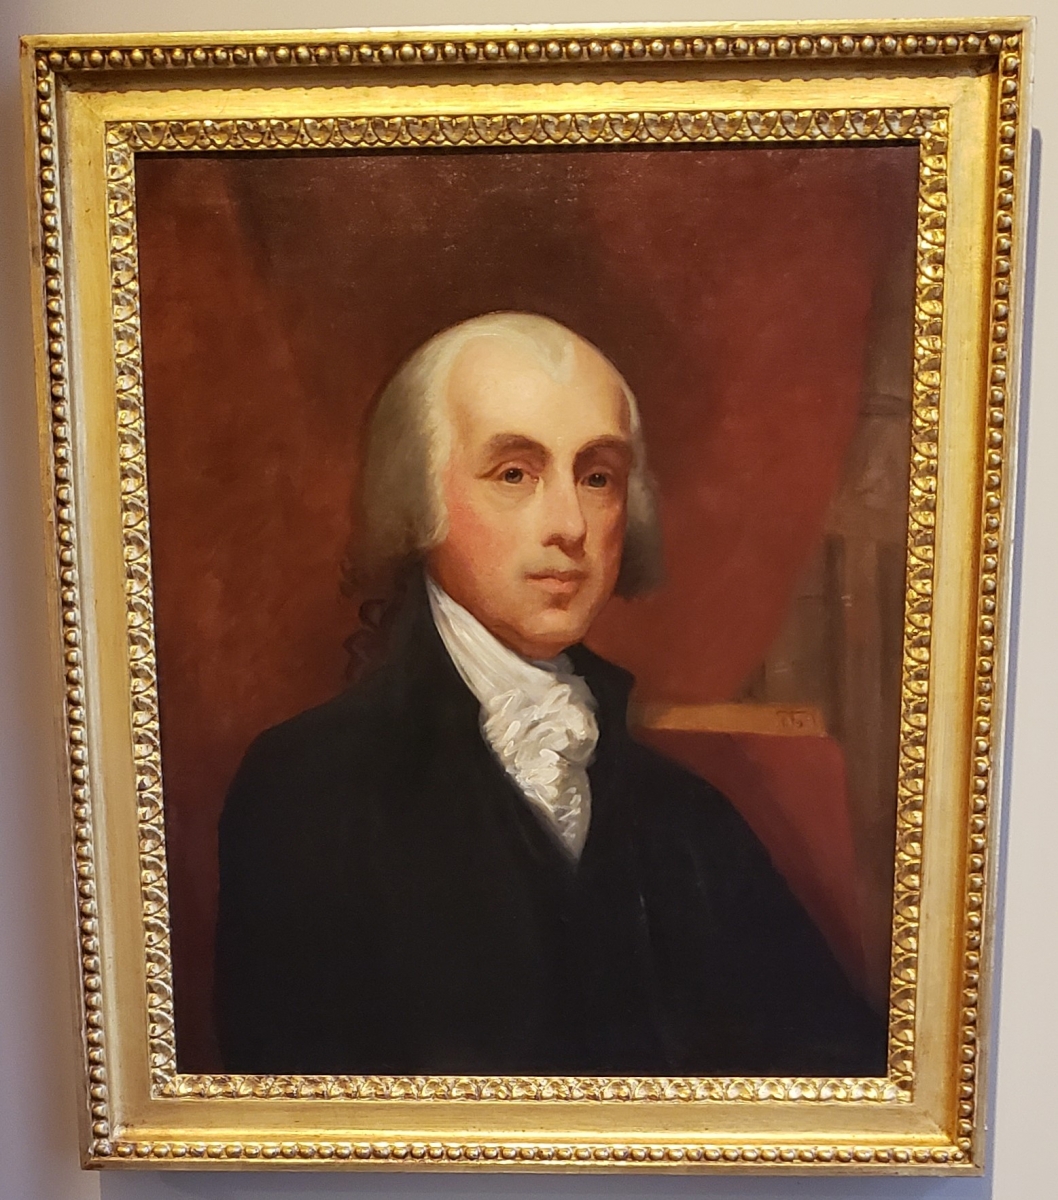 James Madison Portrait on display at Second Bank of the United States Portrait Gallery